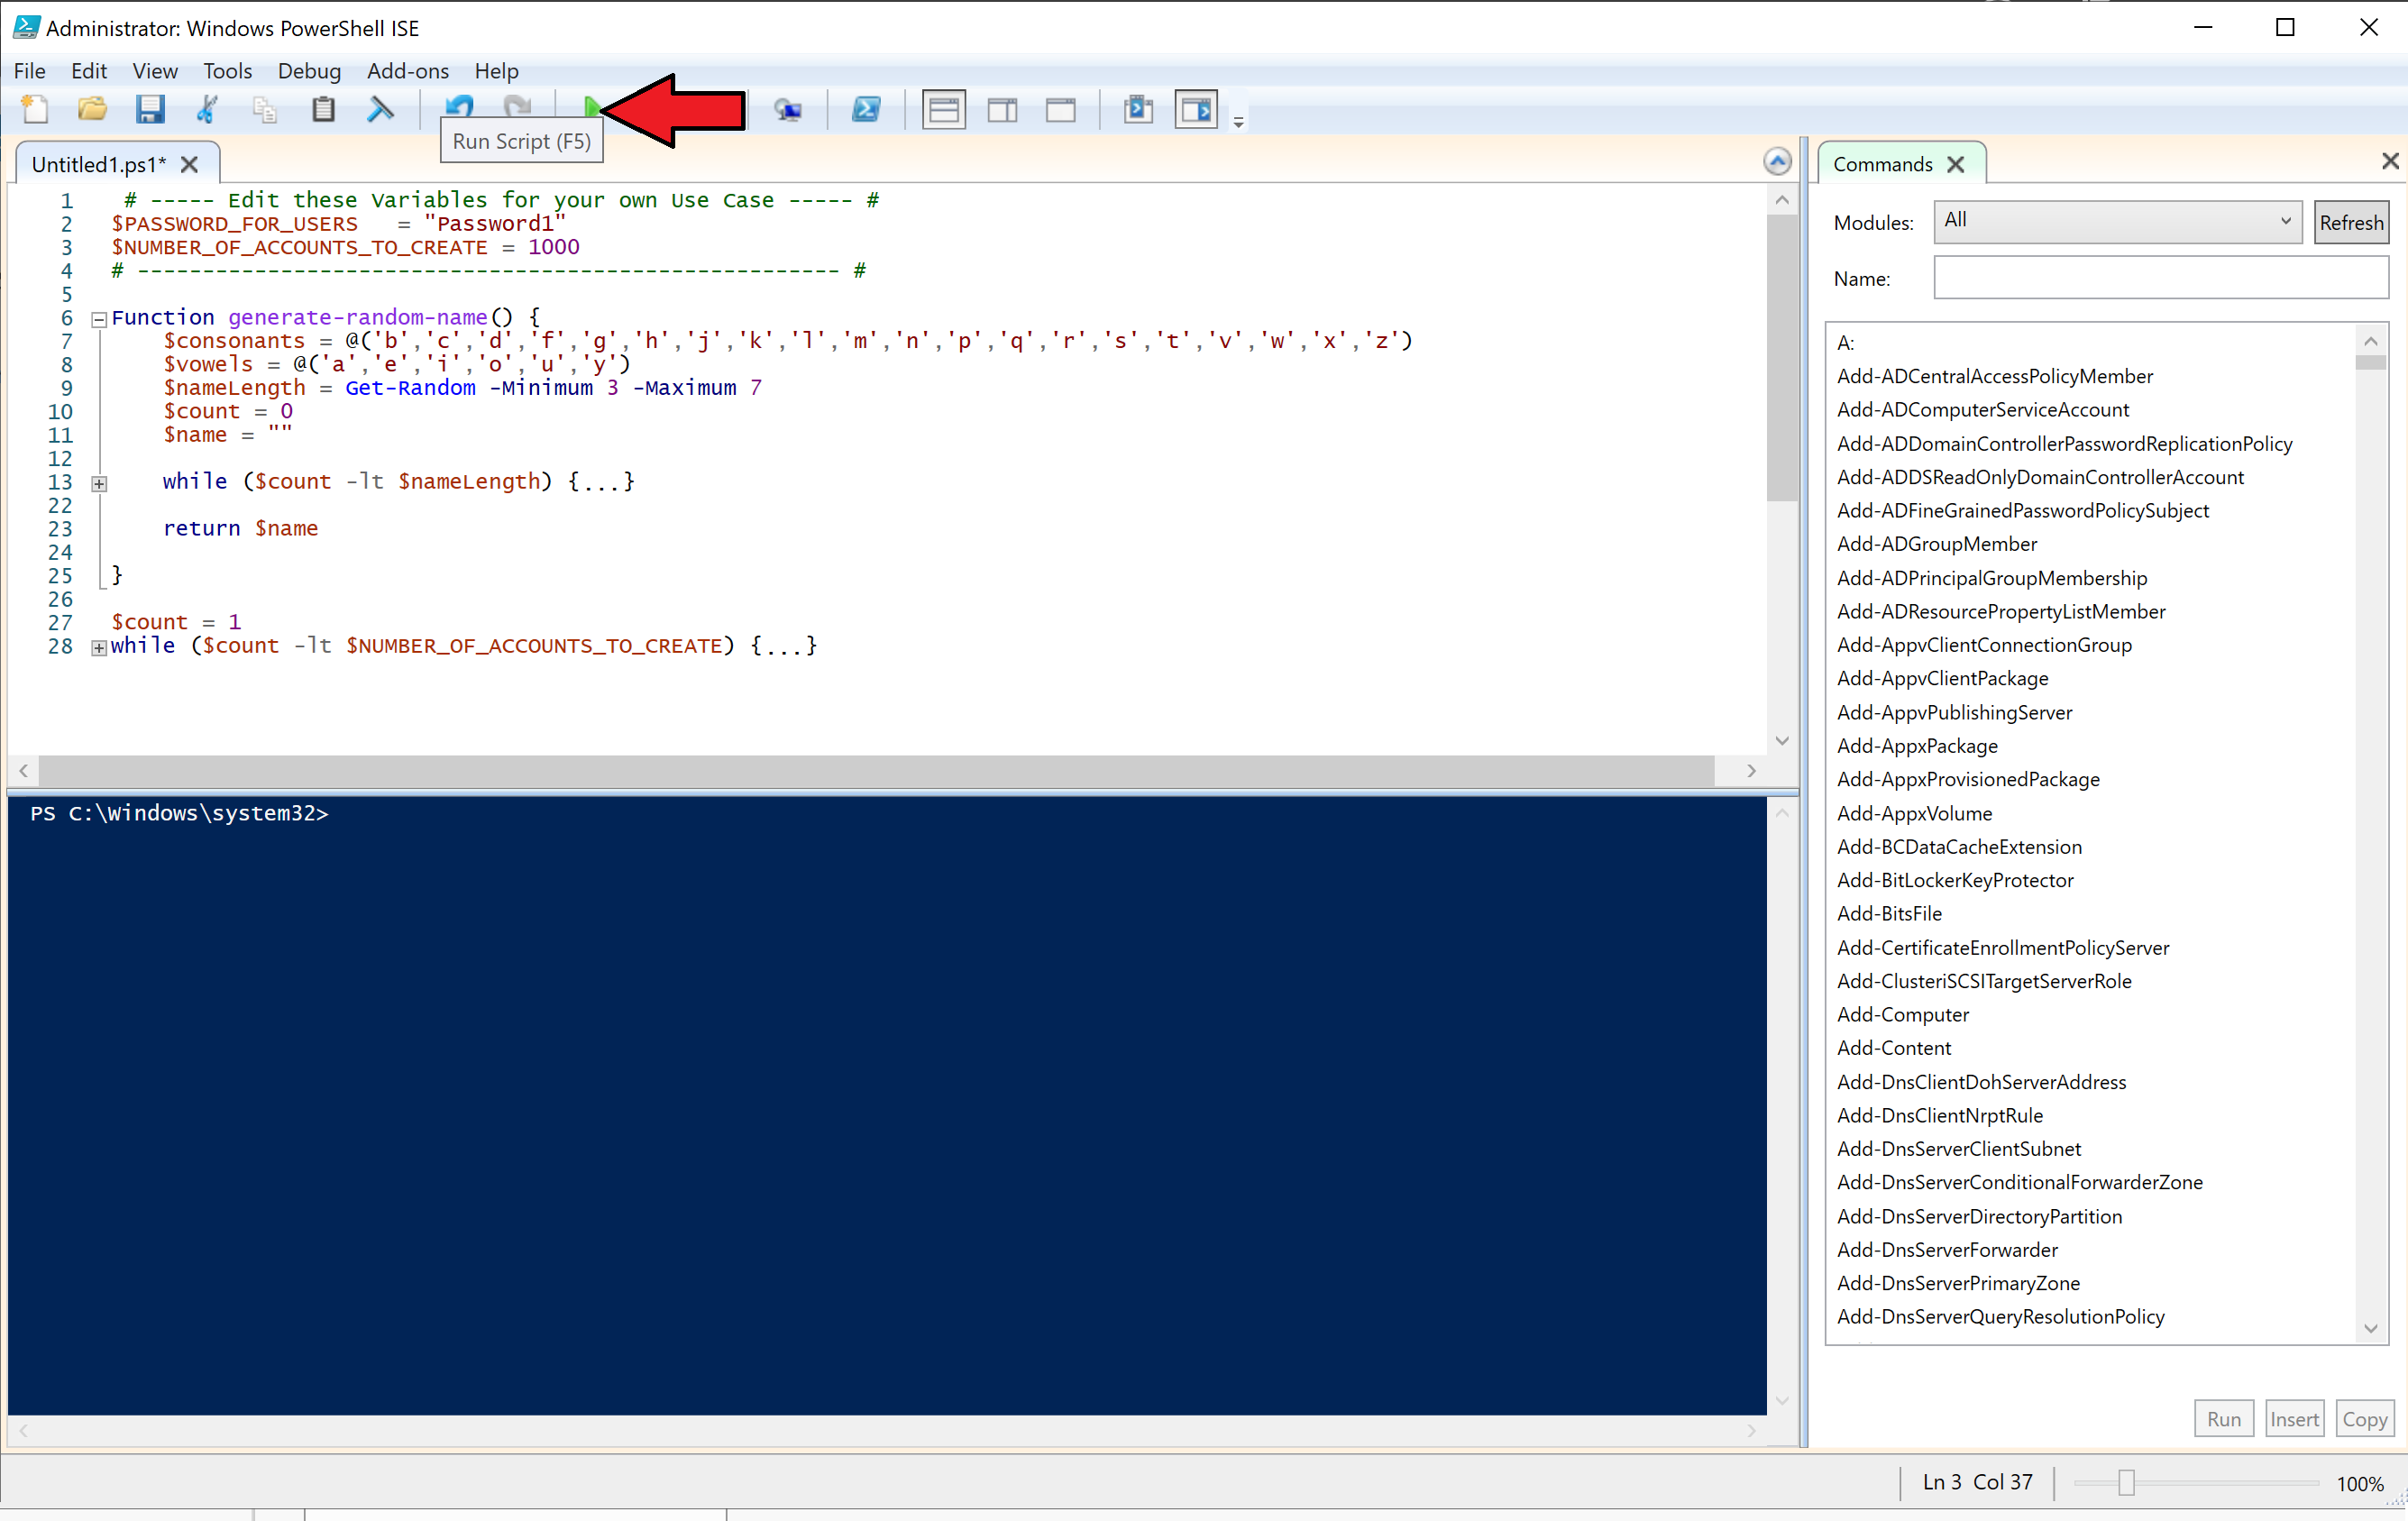 powershell with script loaded